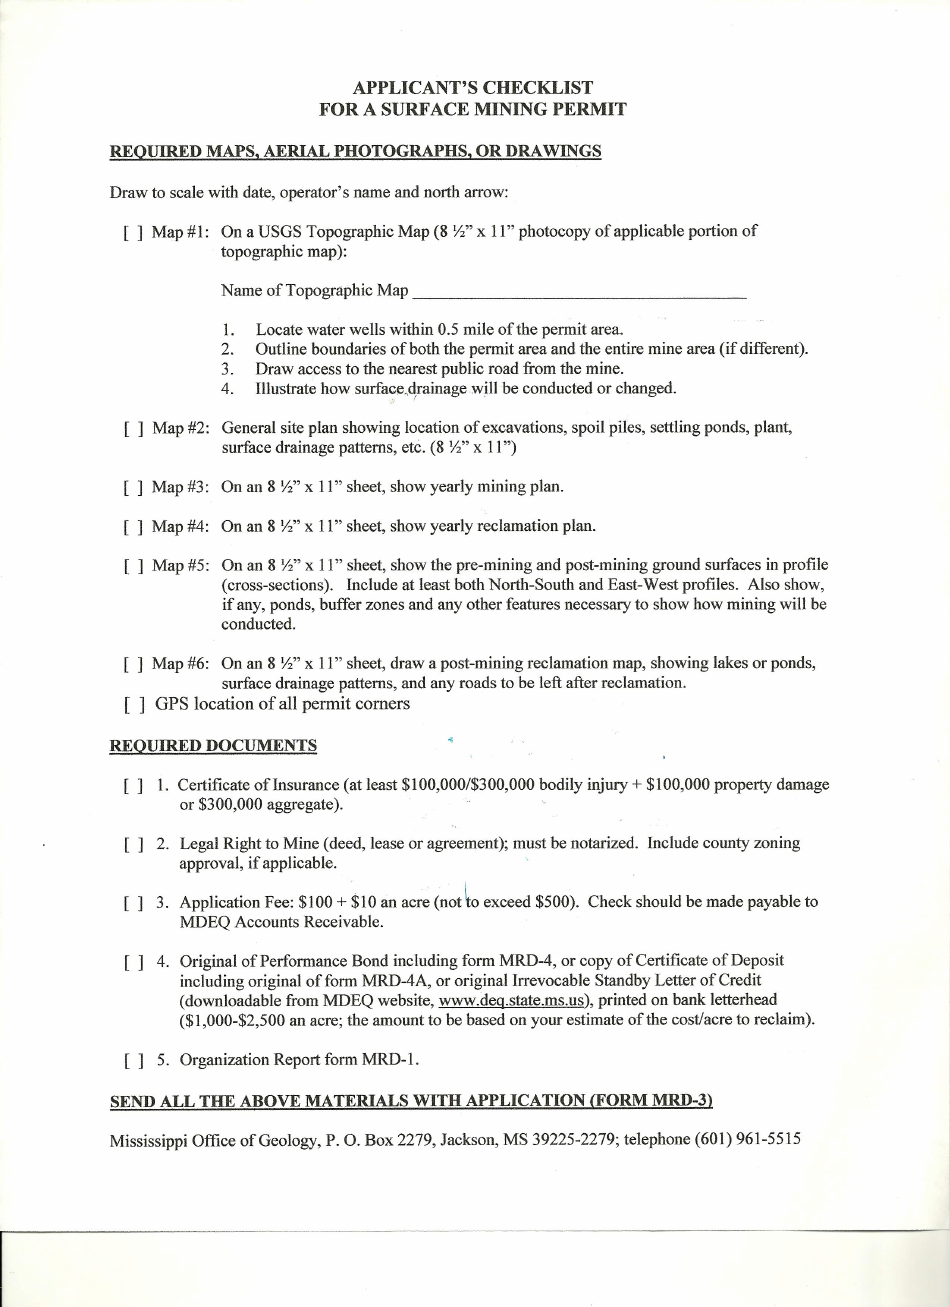 Applicants Checklist for a Surface Mining Permit - Mississippi, Page 1